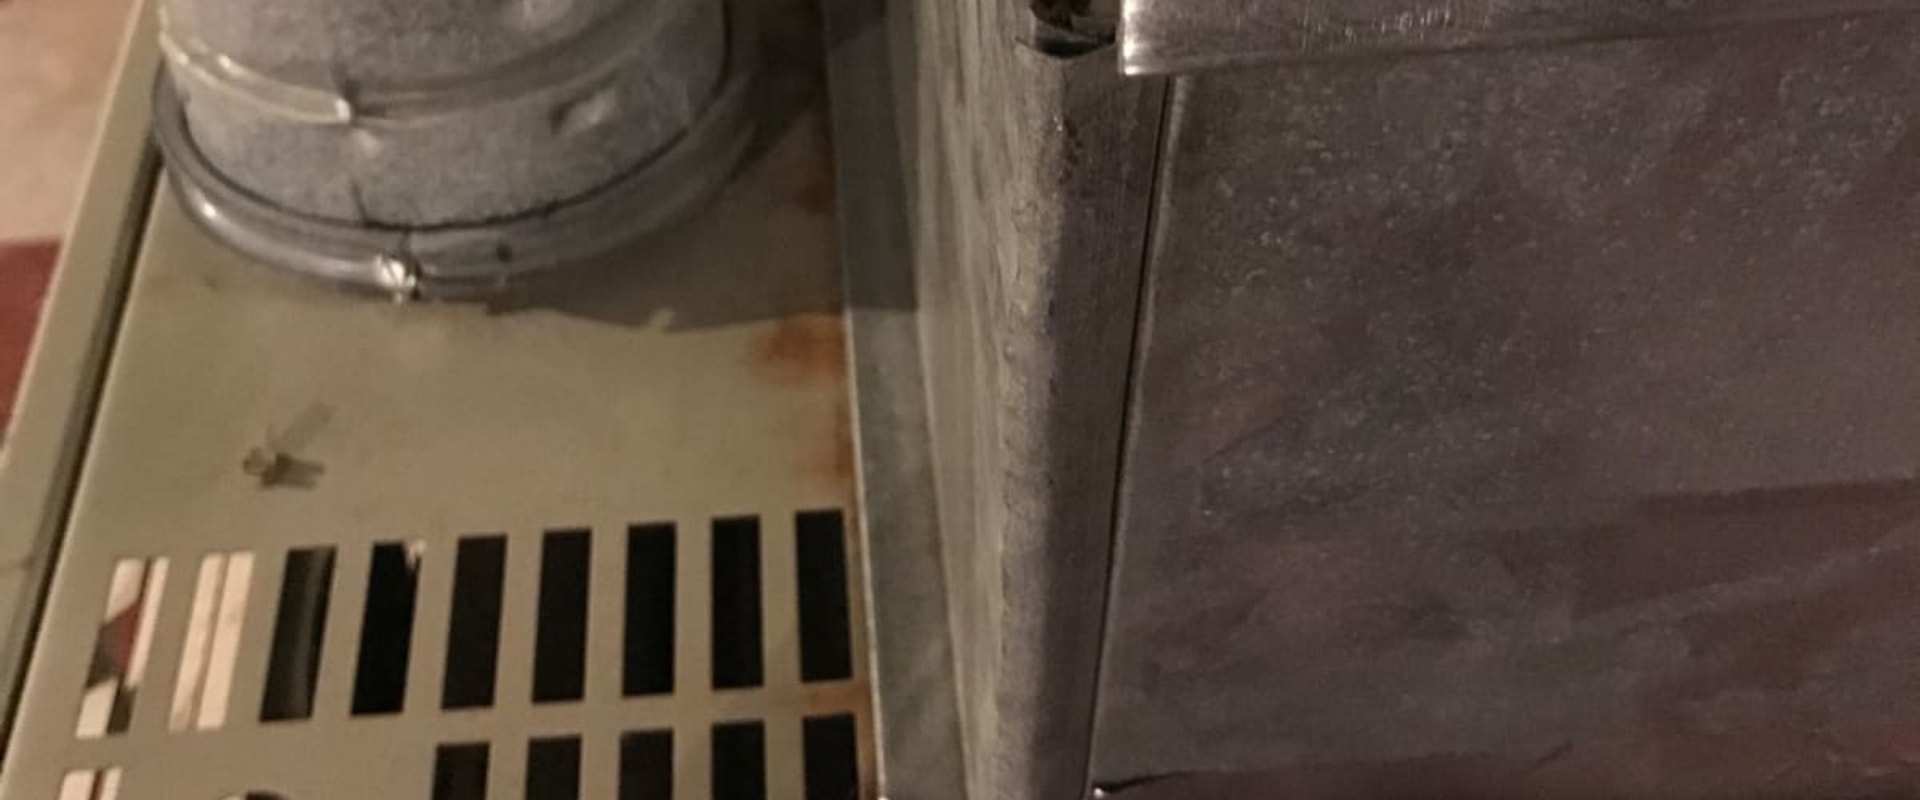 Can i use flex seal on ductwork?